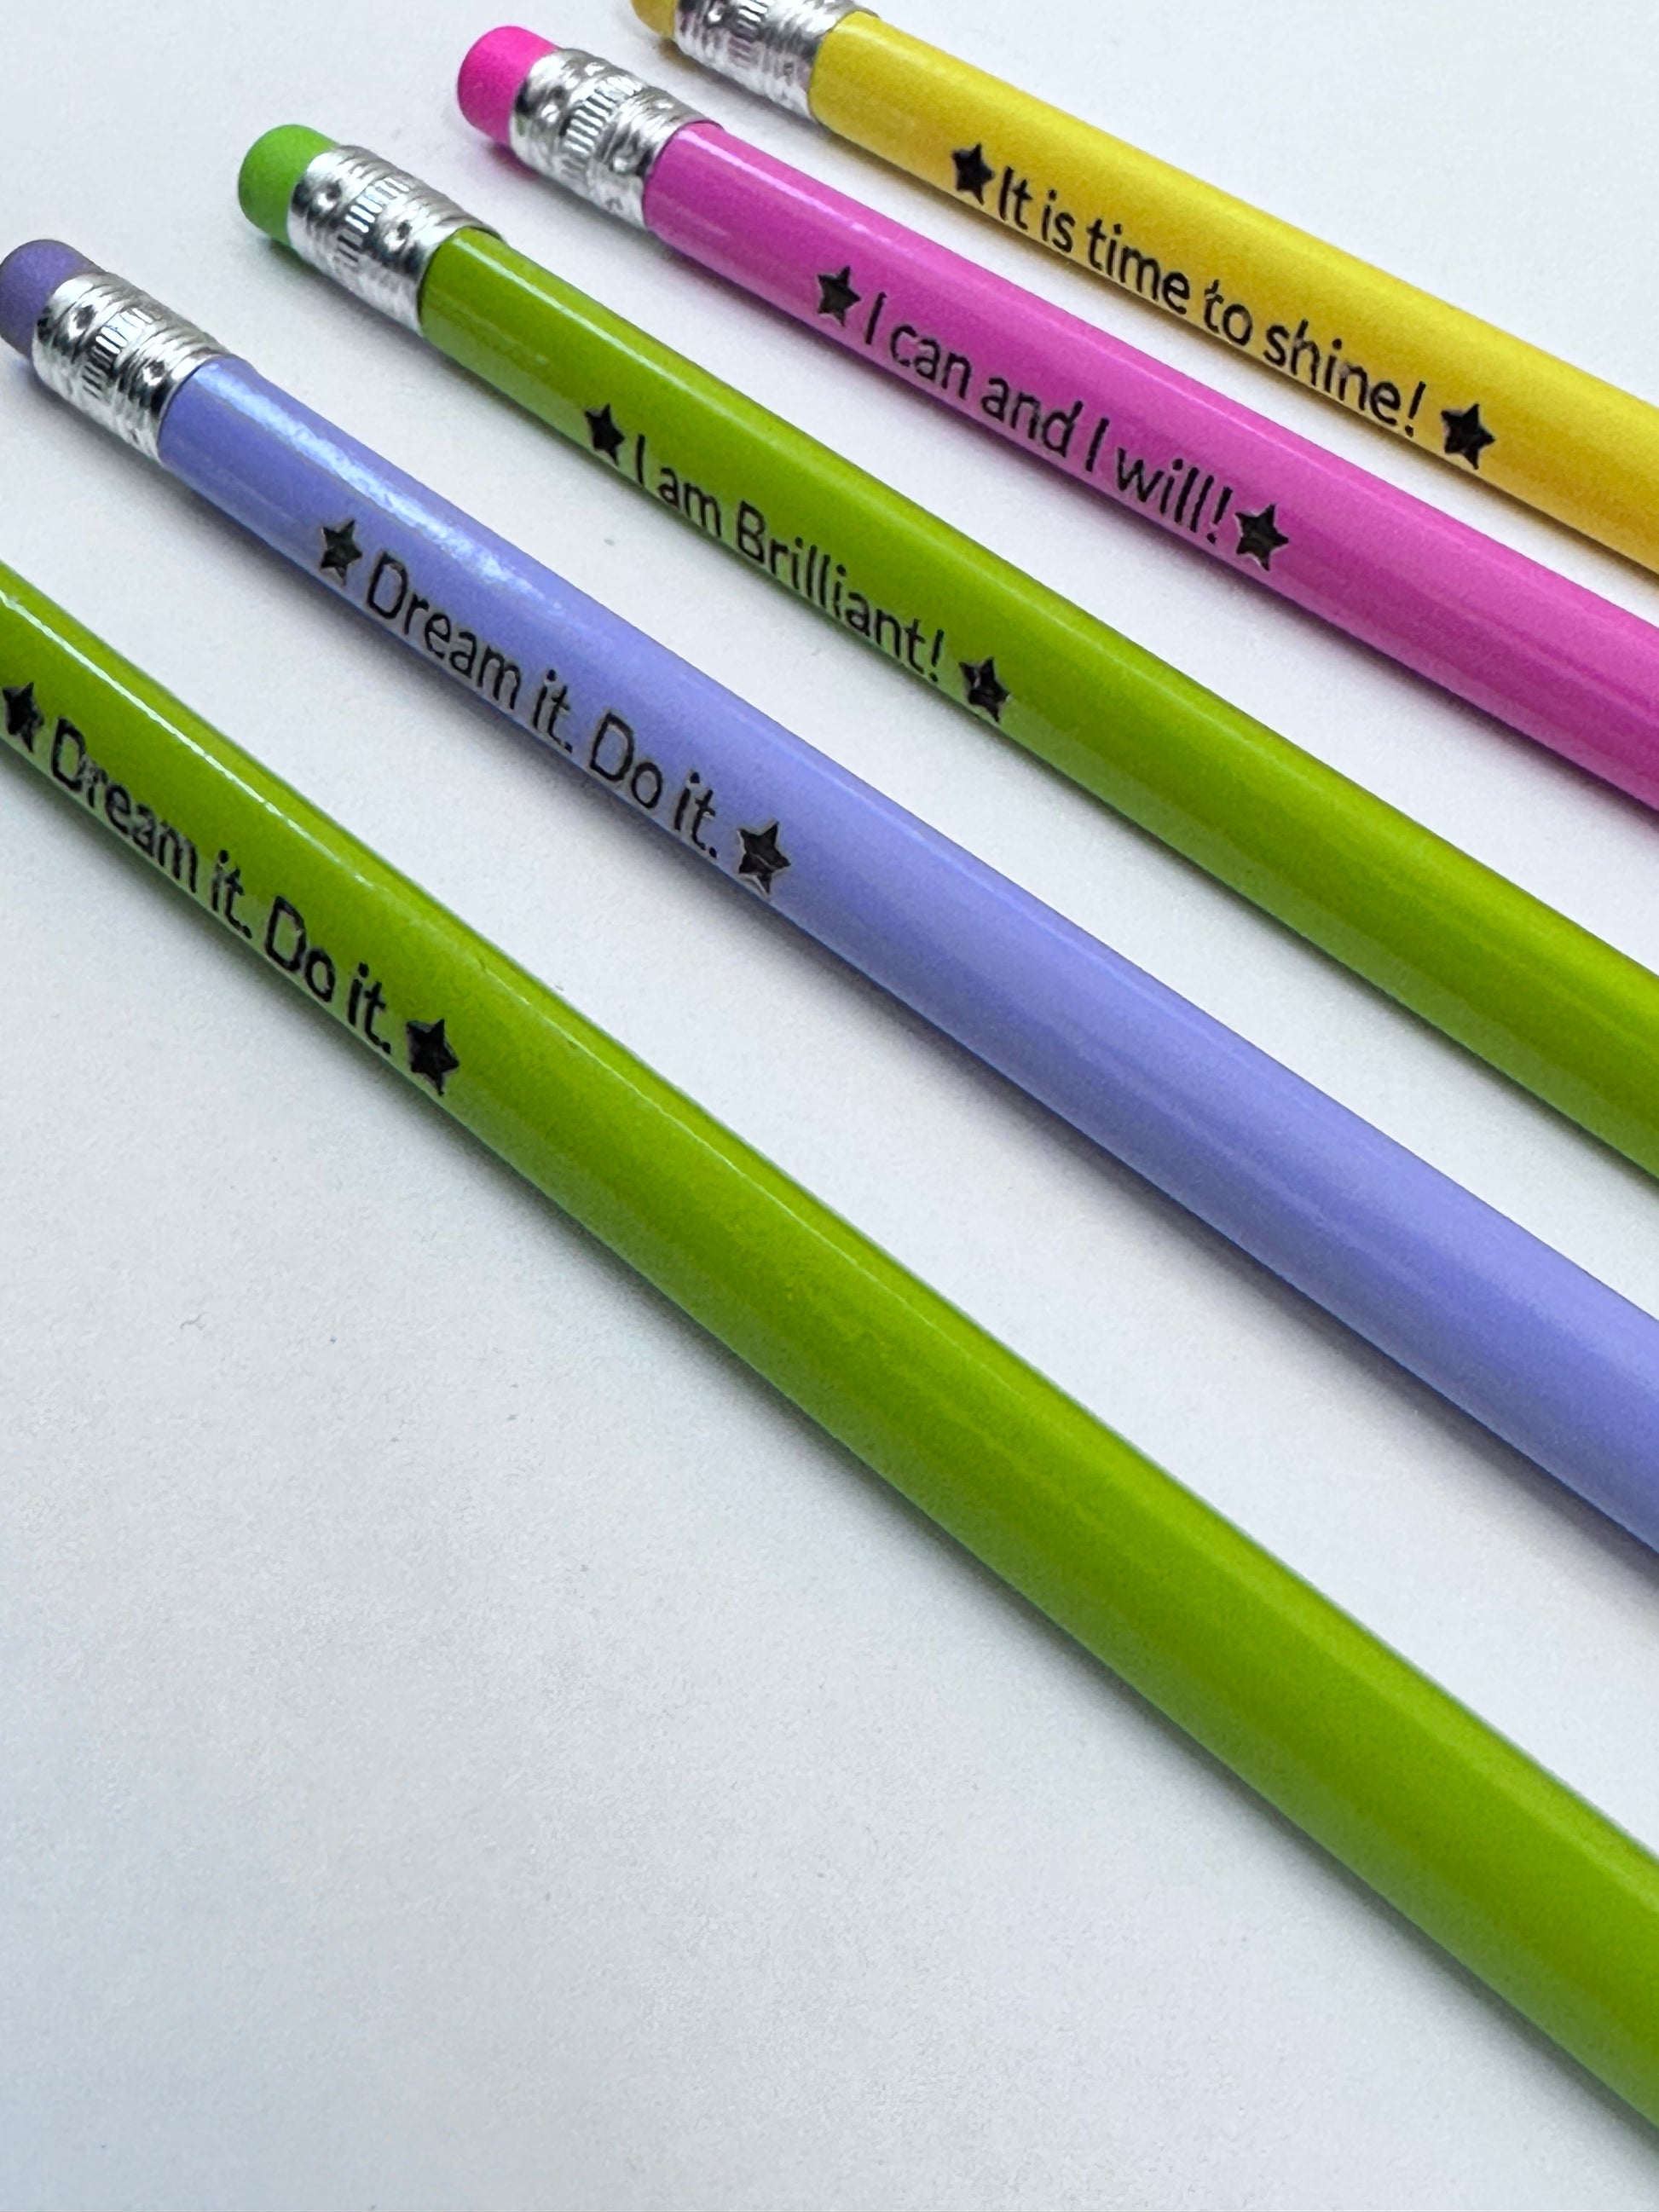 Custom Engraved Super Jumbo Giant Pencil - Add Your Text